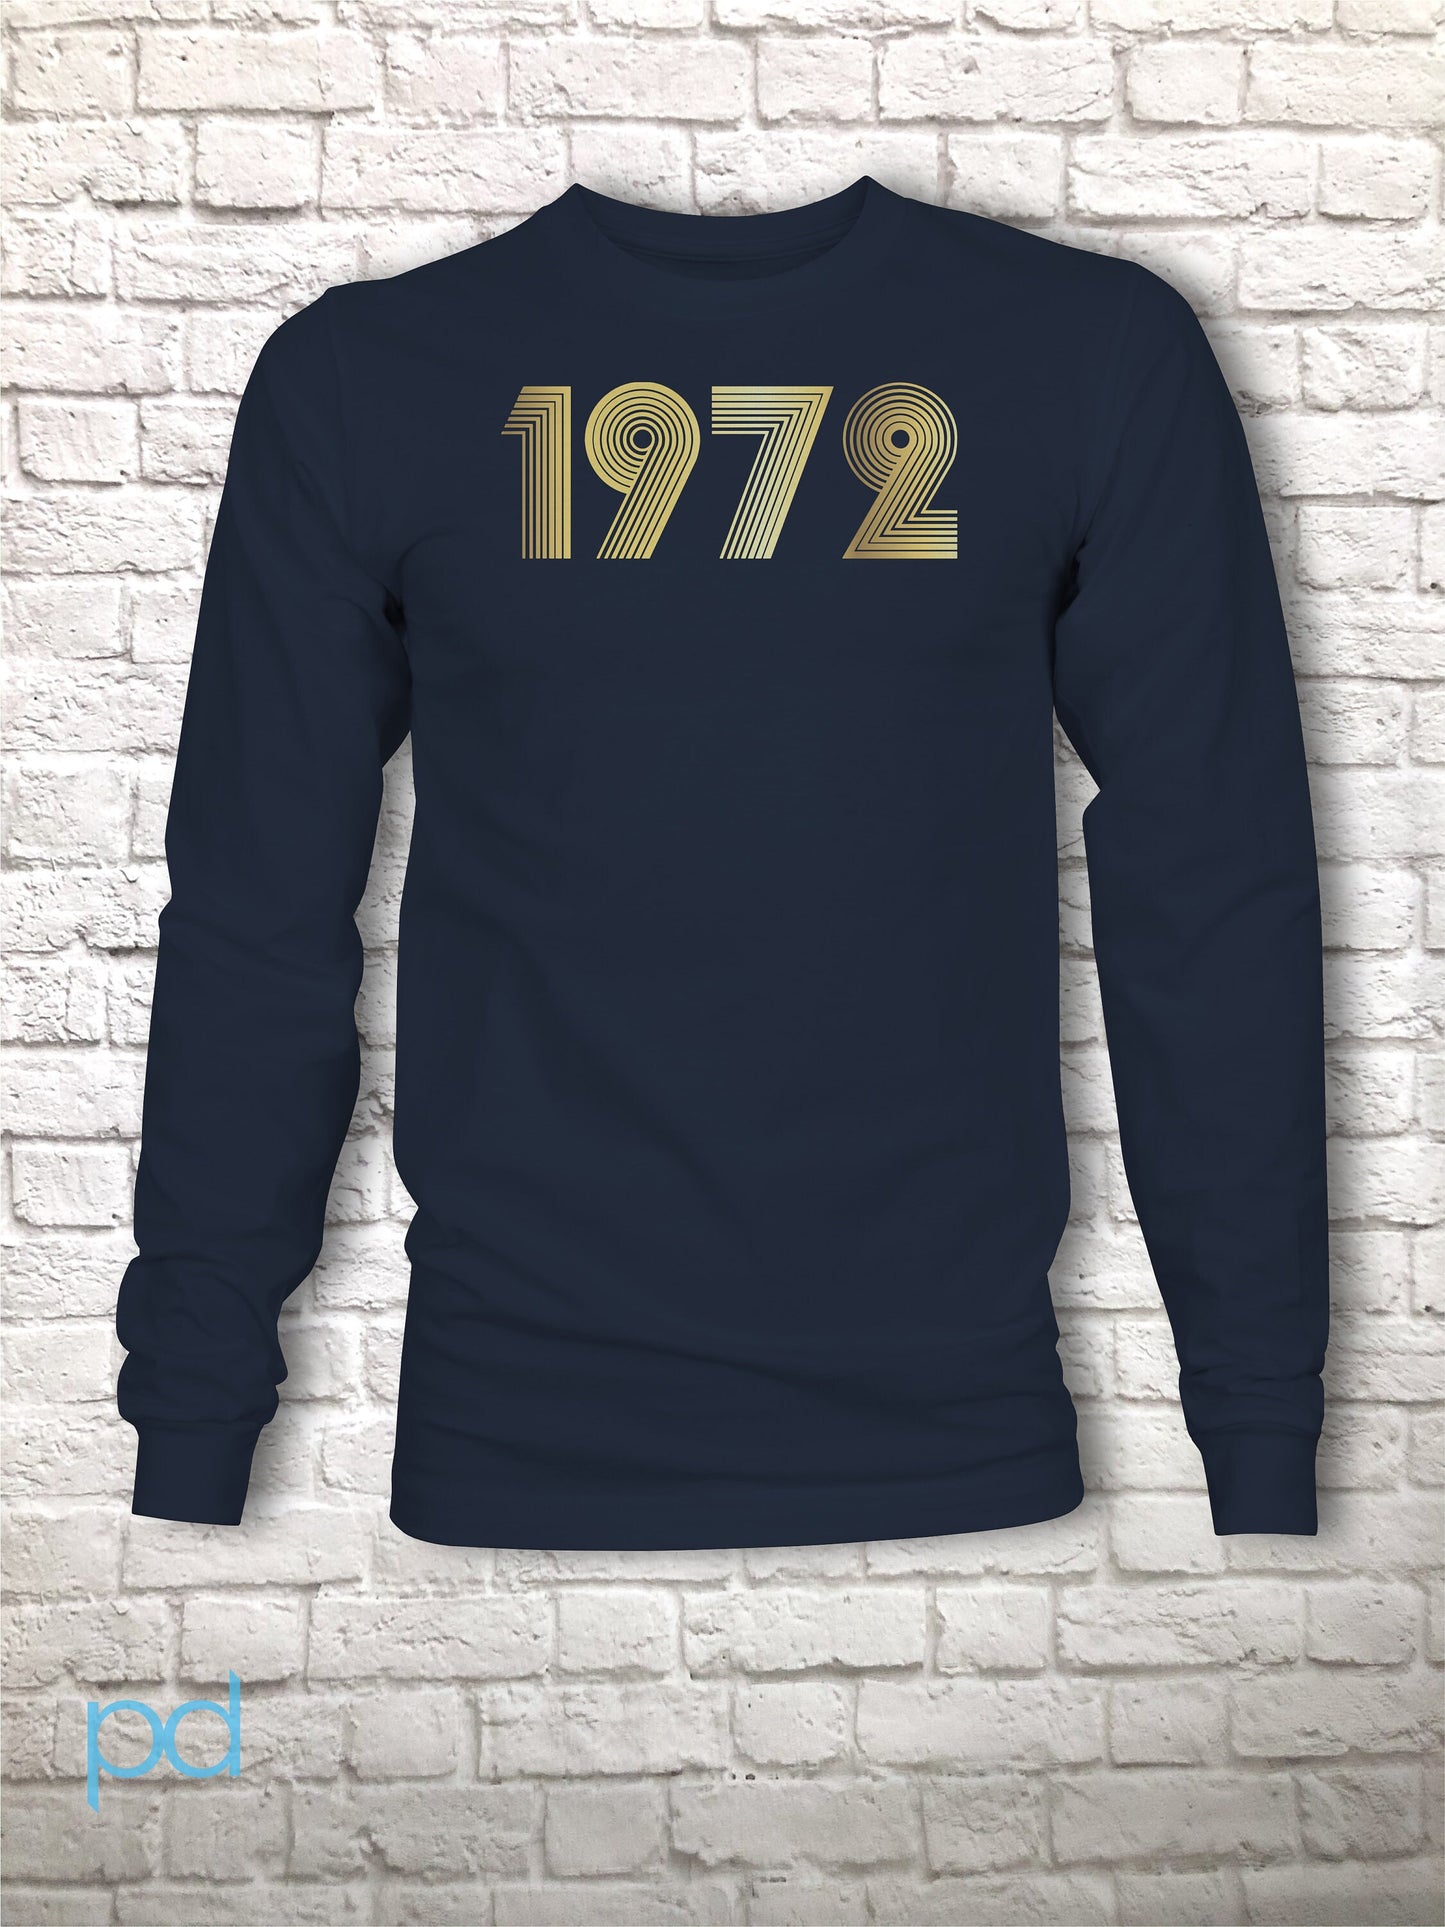 50th Birthday Gift Longsleeve T Shirt Metallic Print Gold, Silver, 1972 T-Shirt in Vintage Retro 70s style font, Fiftieth Present Unisex Top